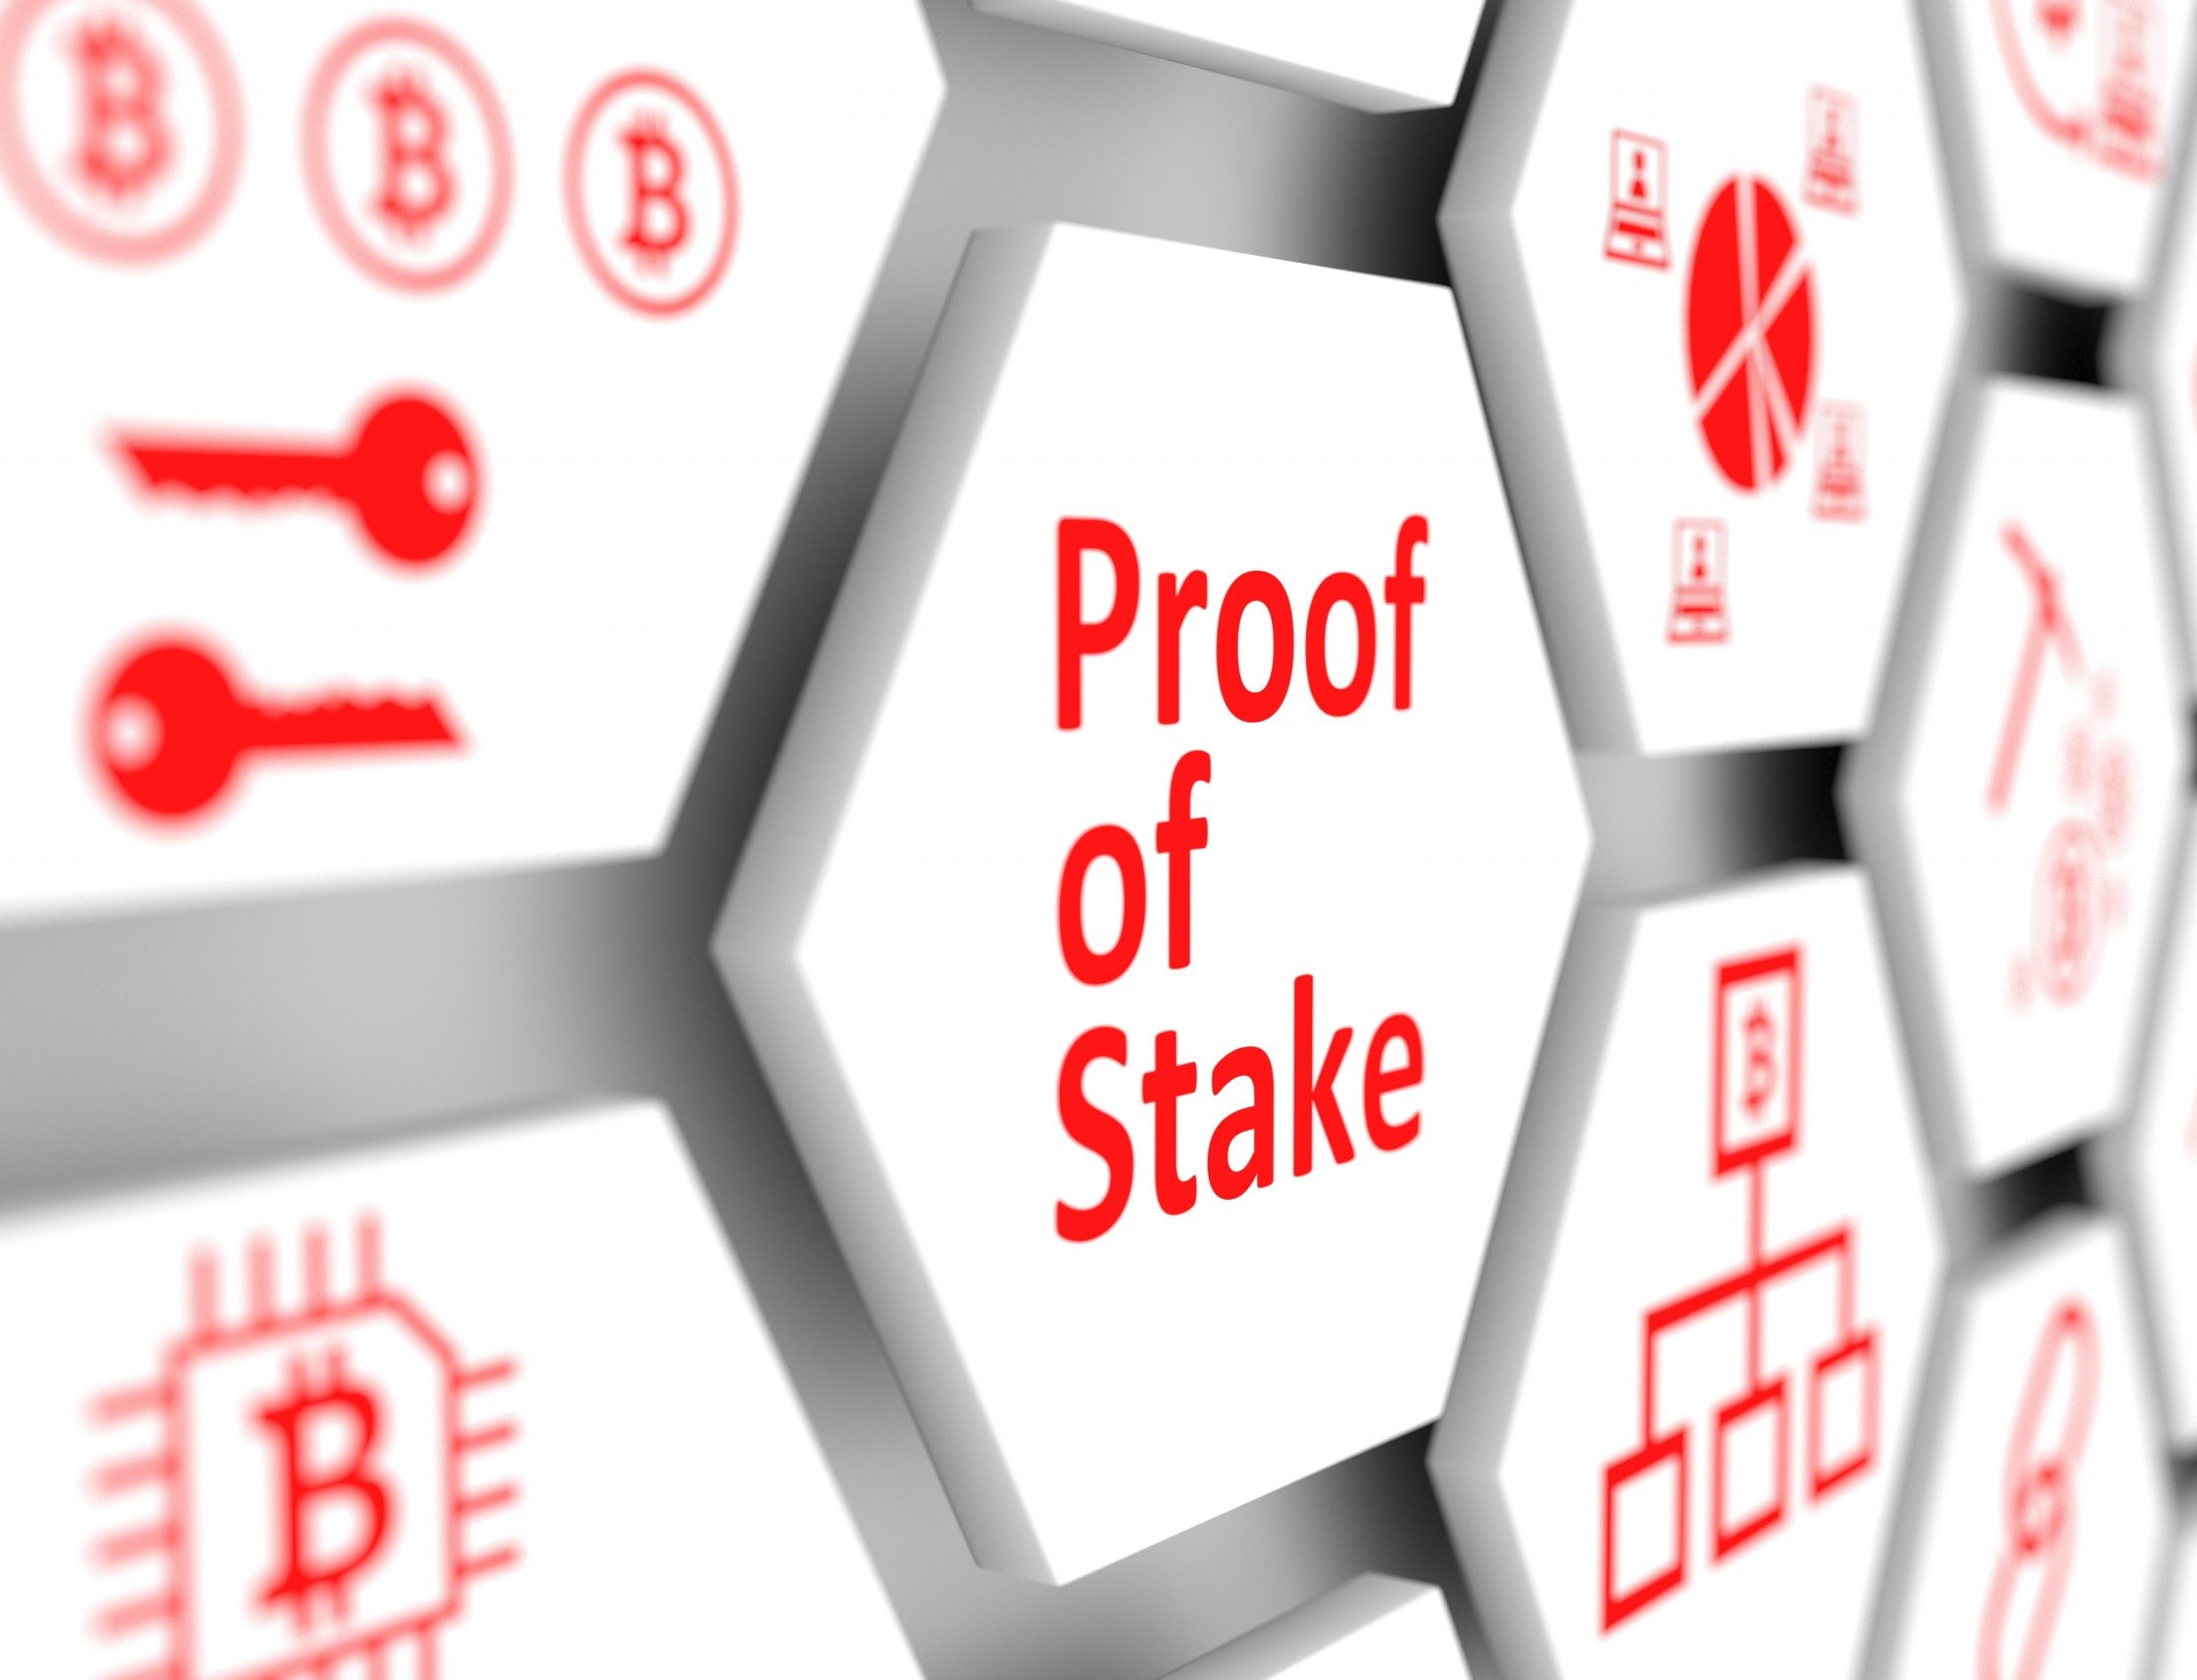 Ripple co-founder proposes migration from proof-of-work to proof-of-stake consensus for Bitcoin